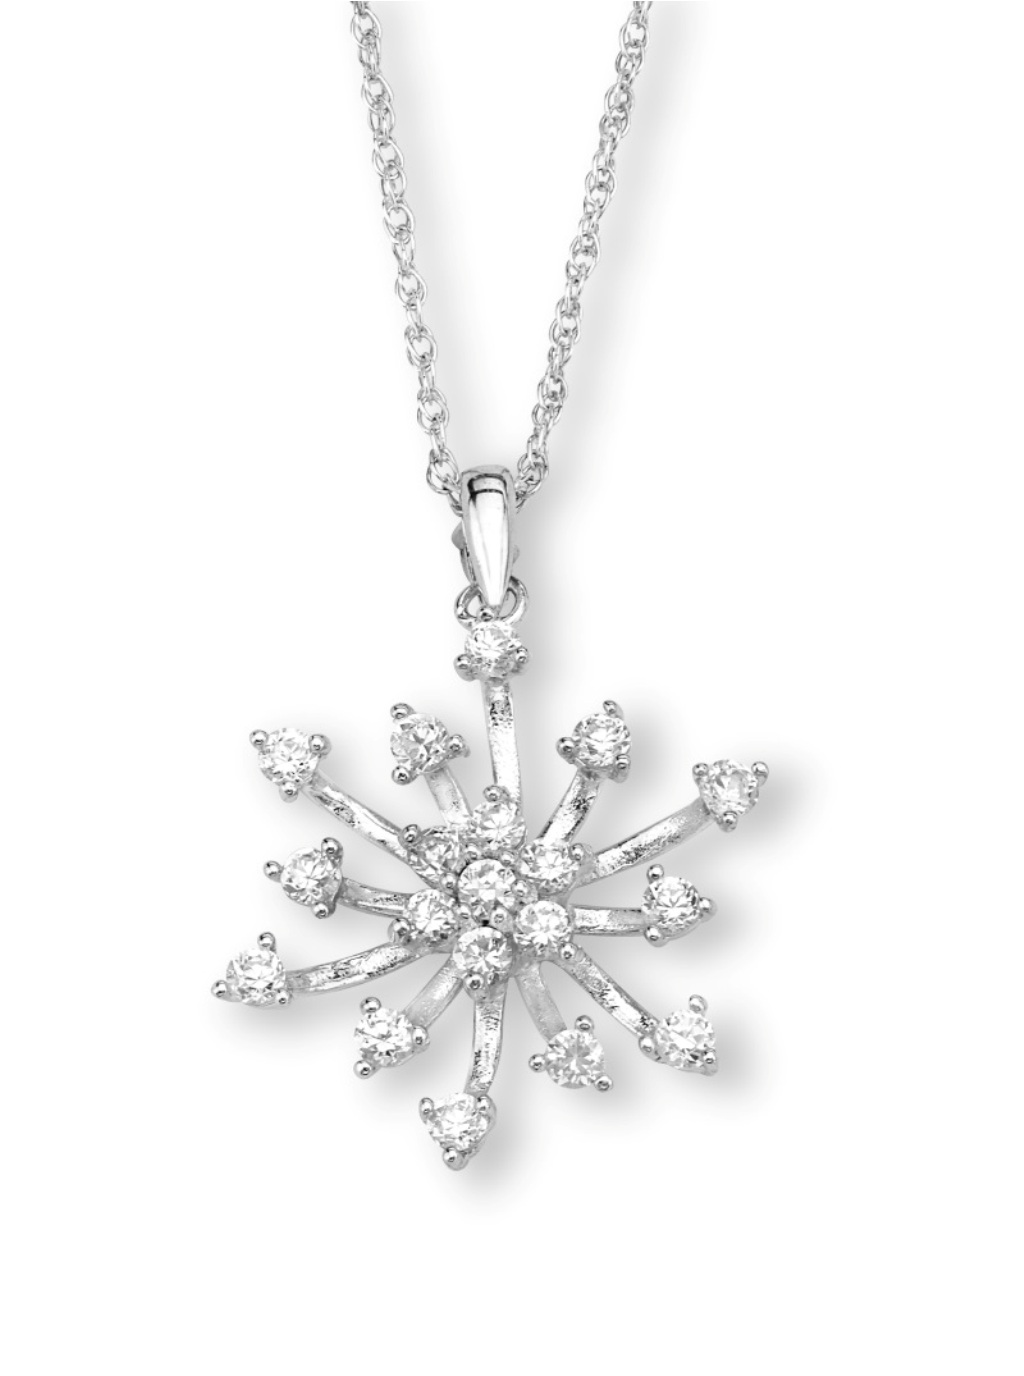  CZ Star Pendant Necklace, Rhodium Plated Sterling Silver, 18